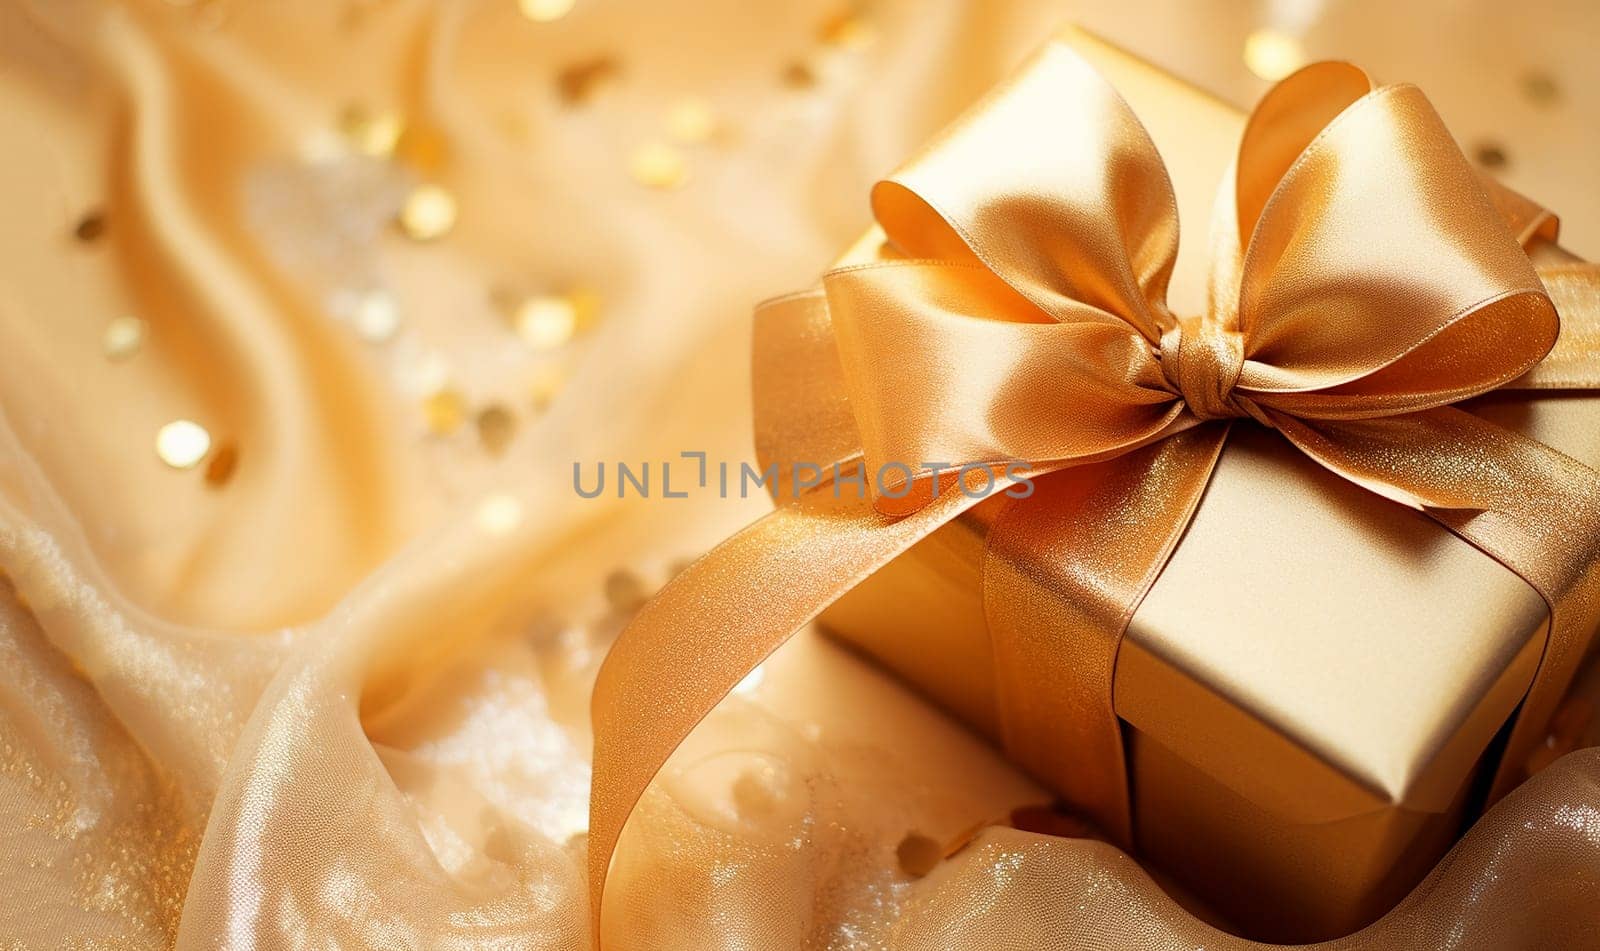 Golden sparkling gitbox with beautiful bow. Celebrating Christmas or New Years other holiday concept. Flat lay, top view copy space bokeh sparkling festive background space for text